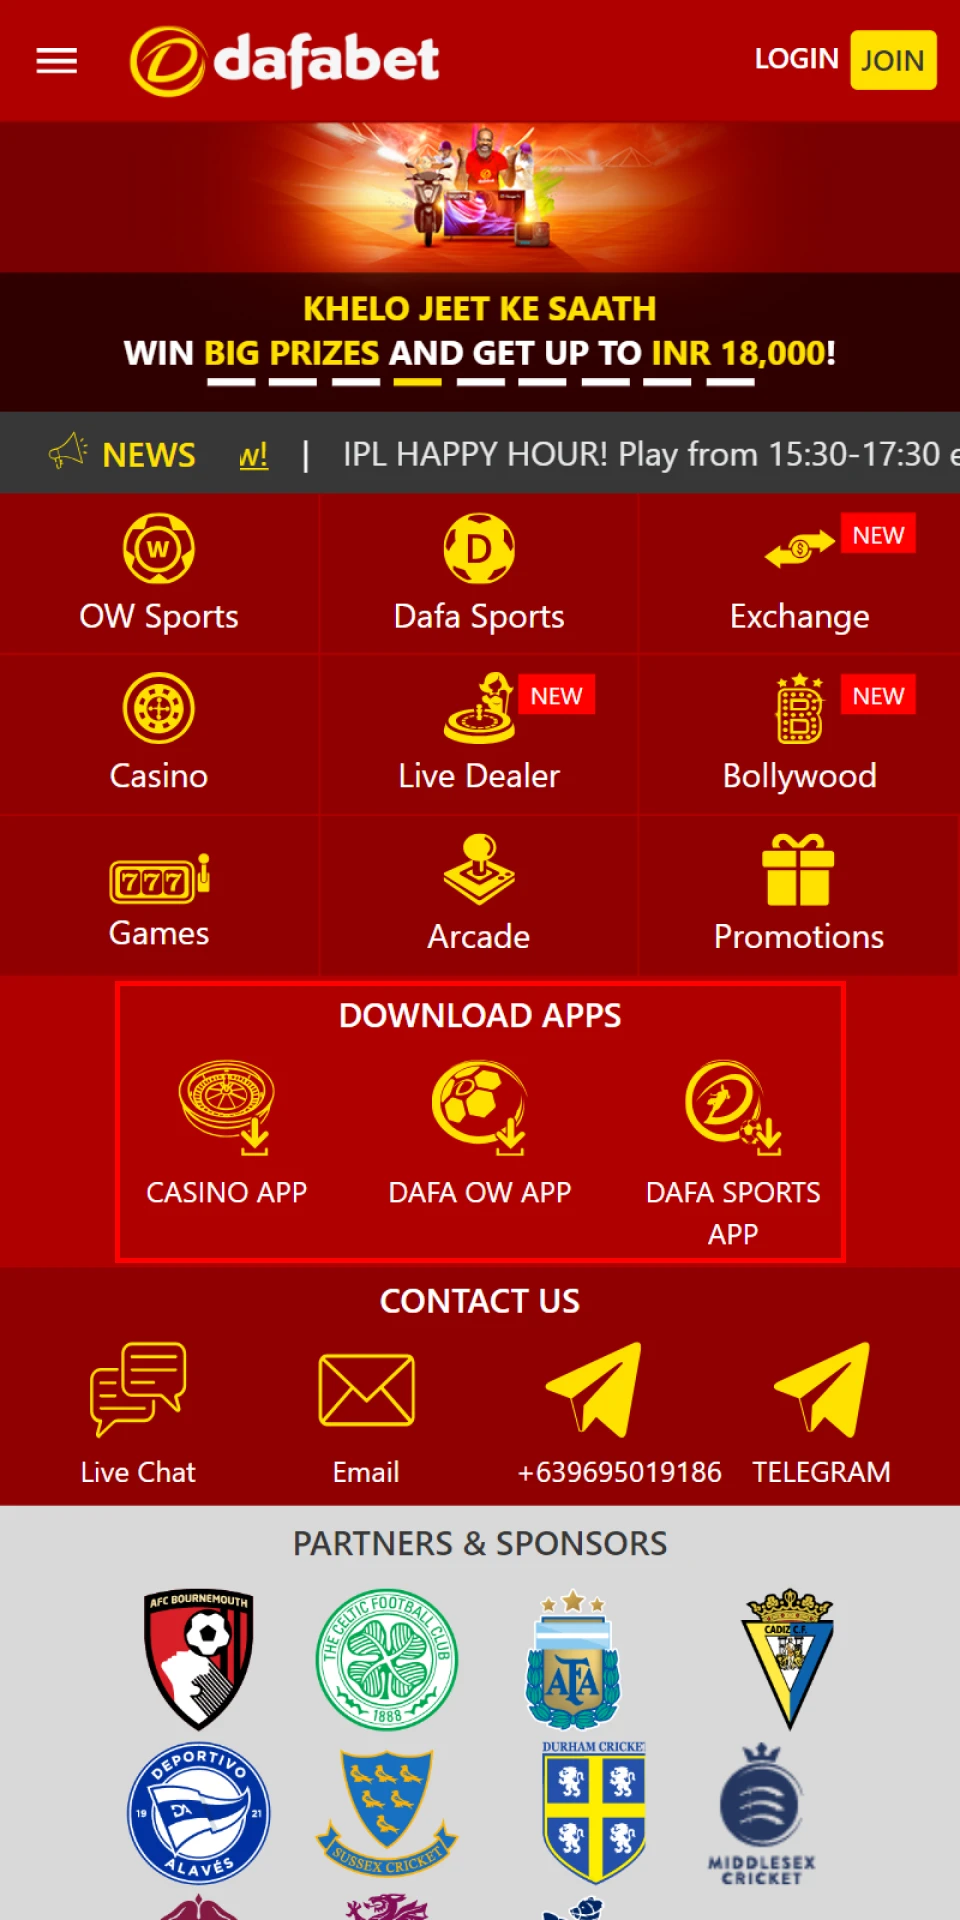 Find the apps section on the Dafabet website to download their application.